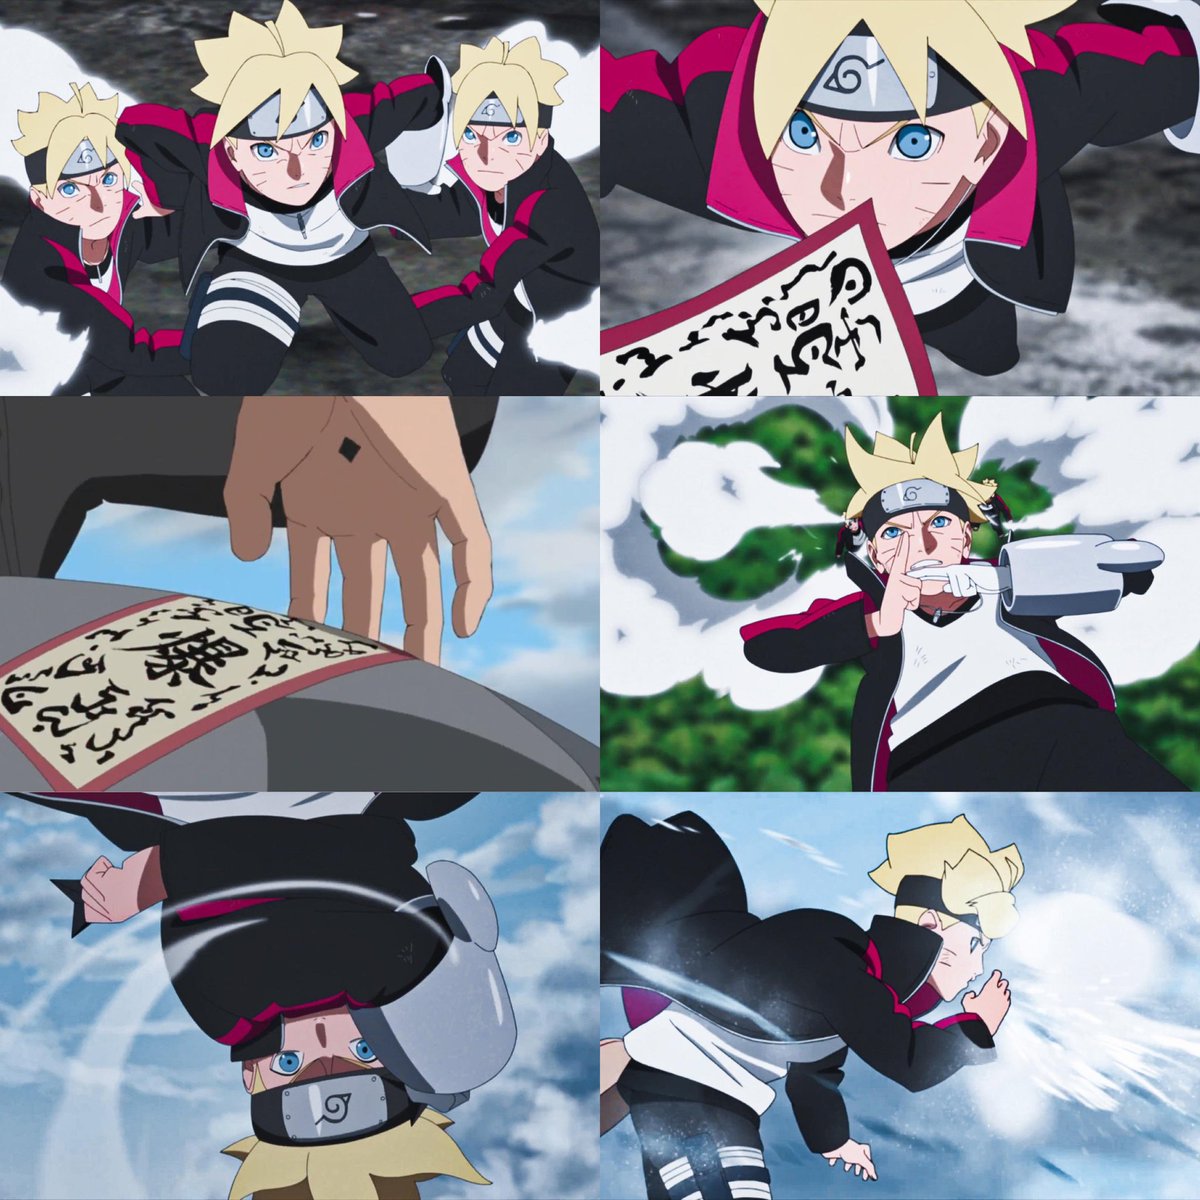 Erfan 🔩 on X: There's a reason why boruto fans are like this